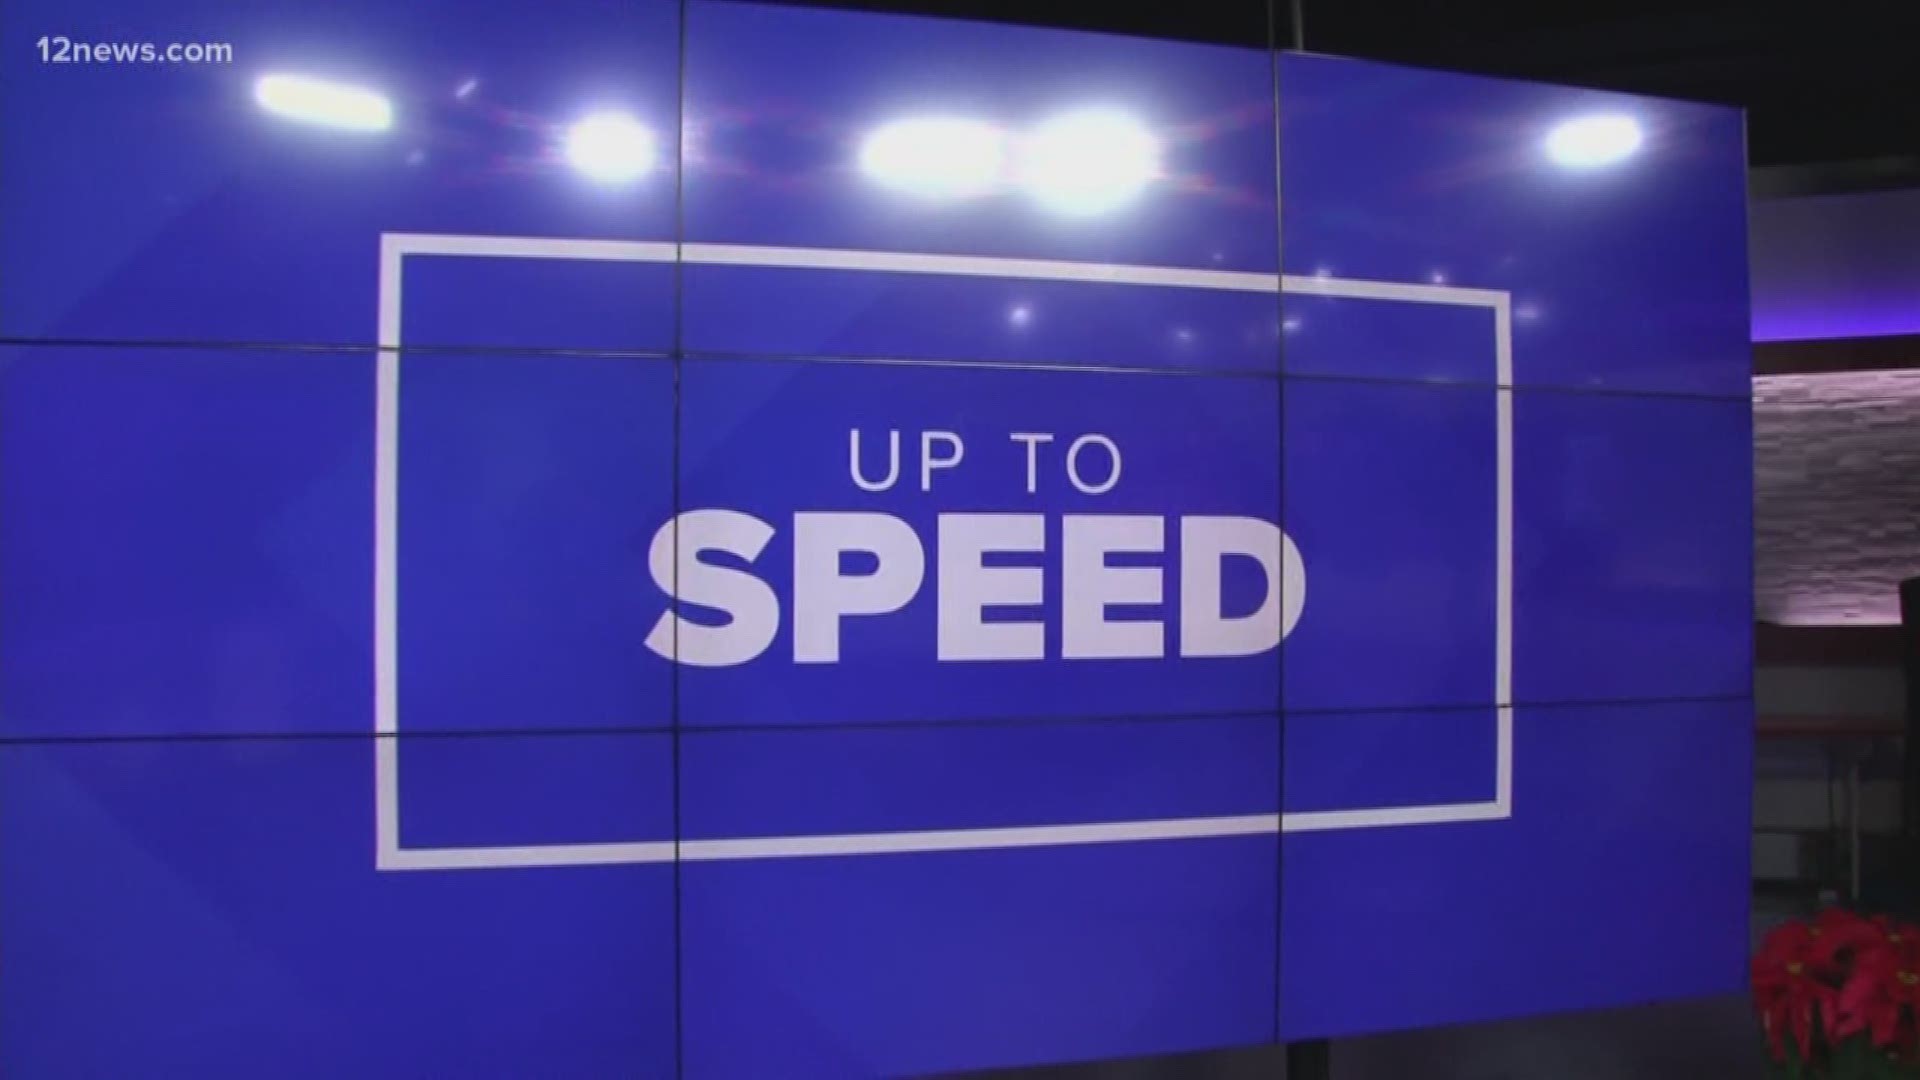 We get you 'Up to Speed' on the latest news happening around the Valley and across the nation.